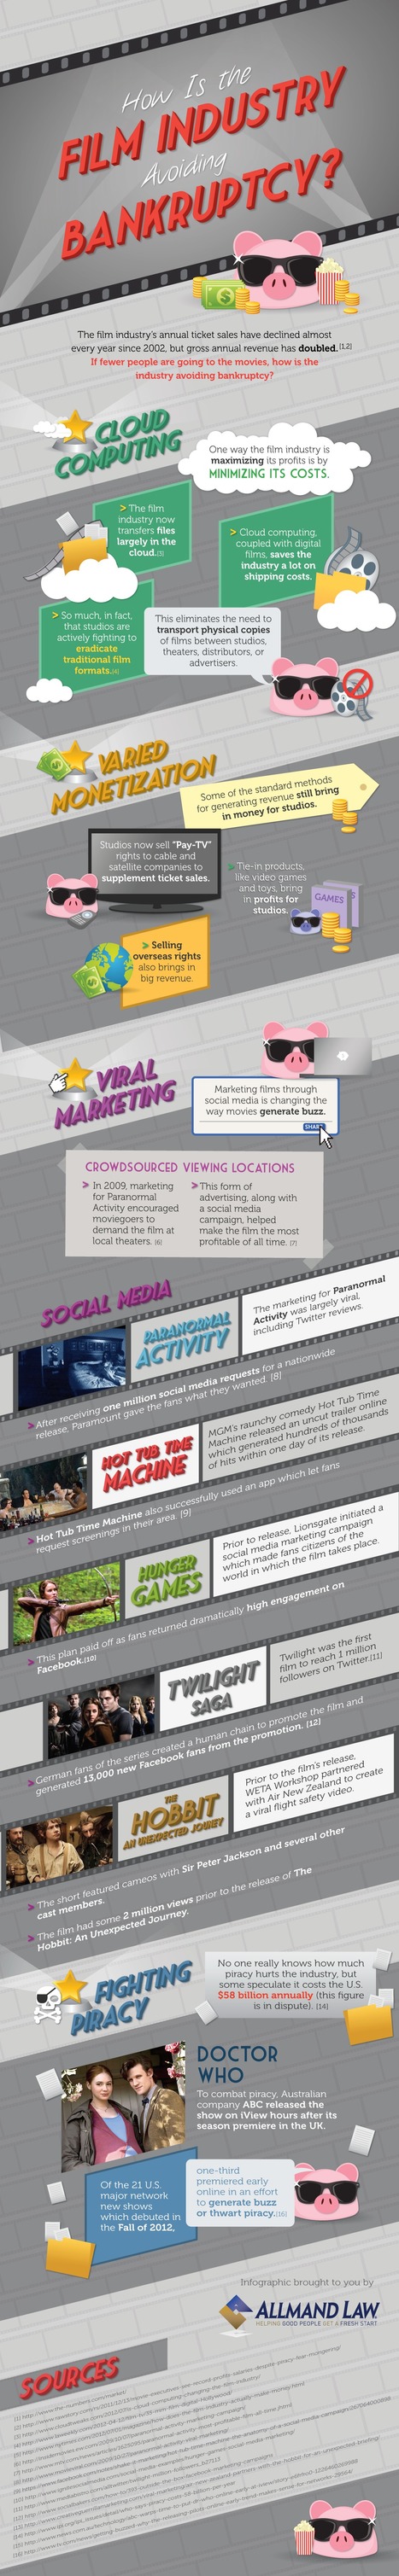 How Social Media and Viral Marketing are Saving the Film Industry [INFOGRAPHIC] | Transmedia: Storytelling for the Digital Age | Scoop.it